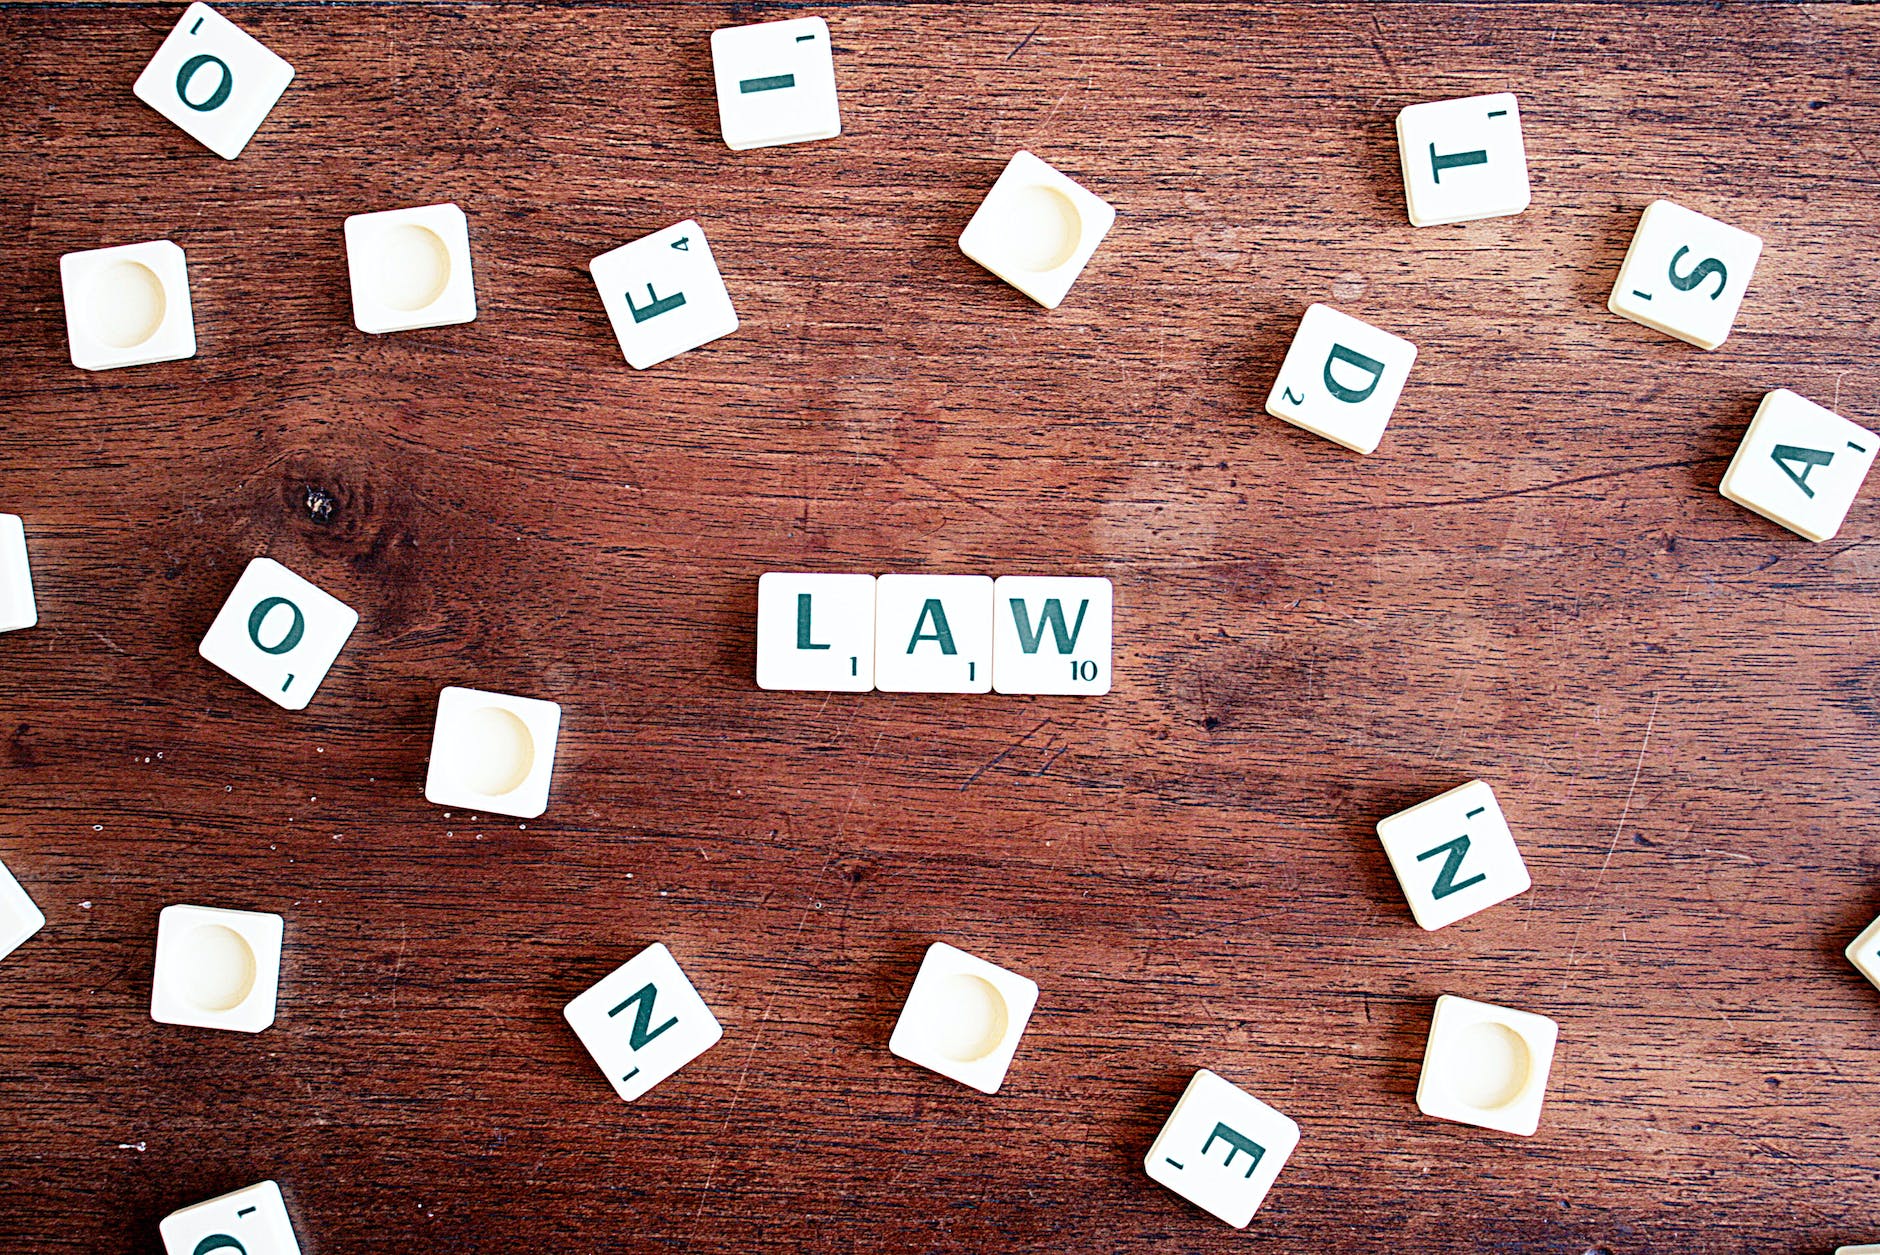 9 Extremely Useful Laws for Work & Life (to remember always)